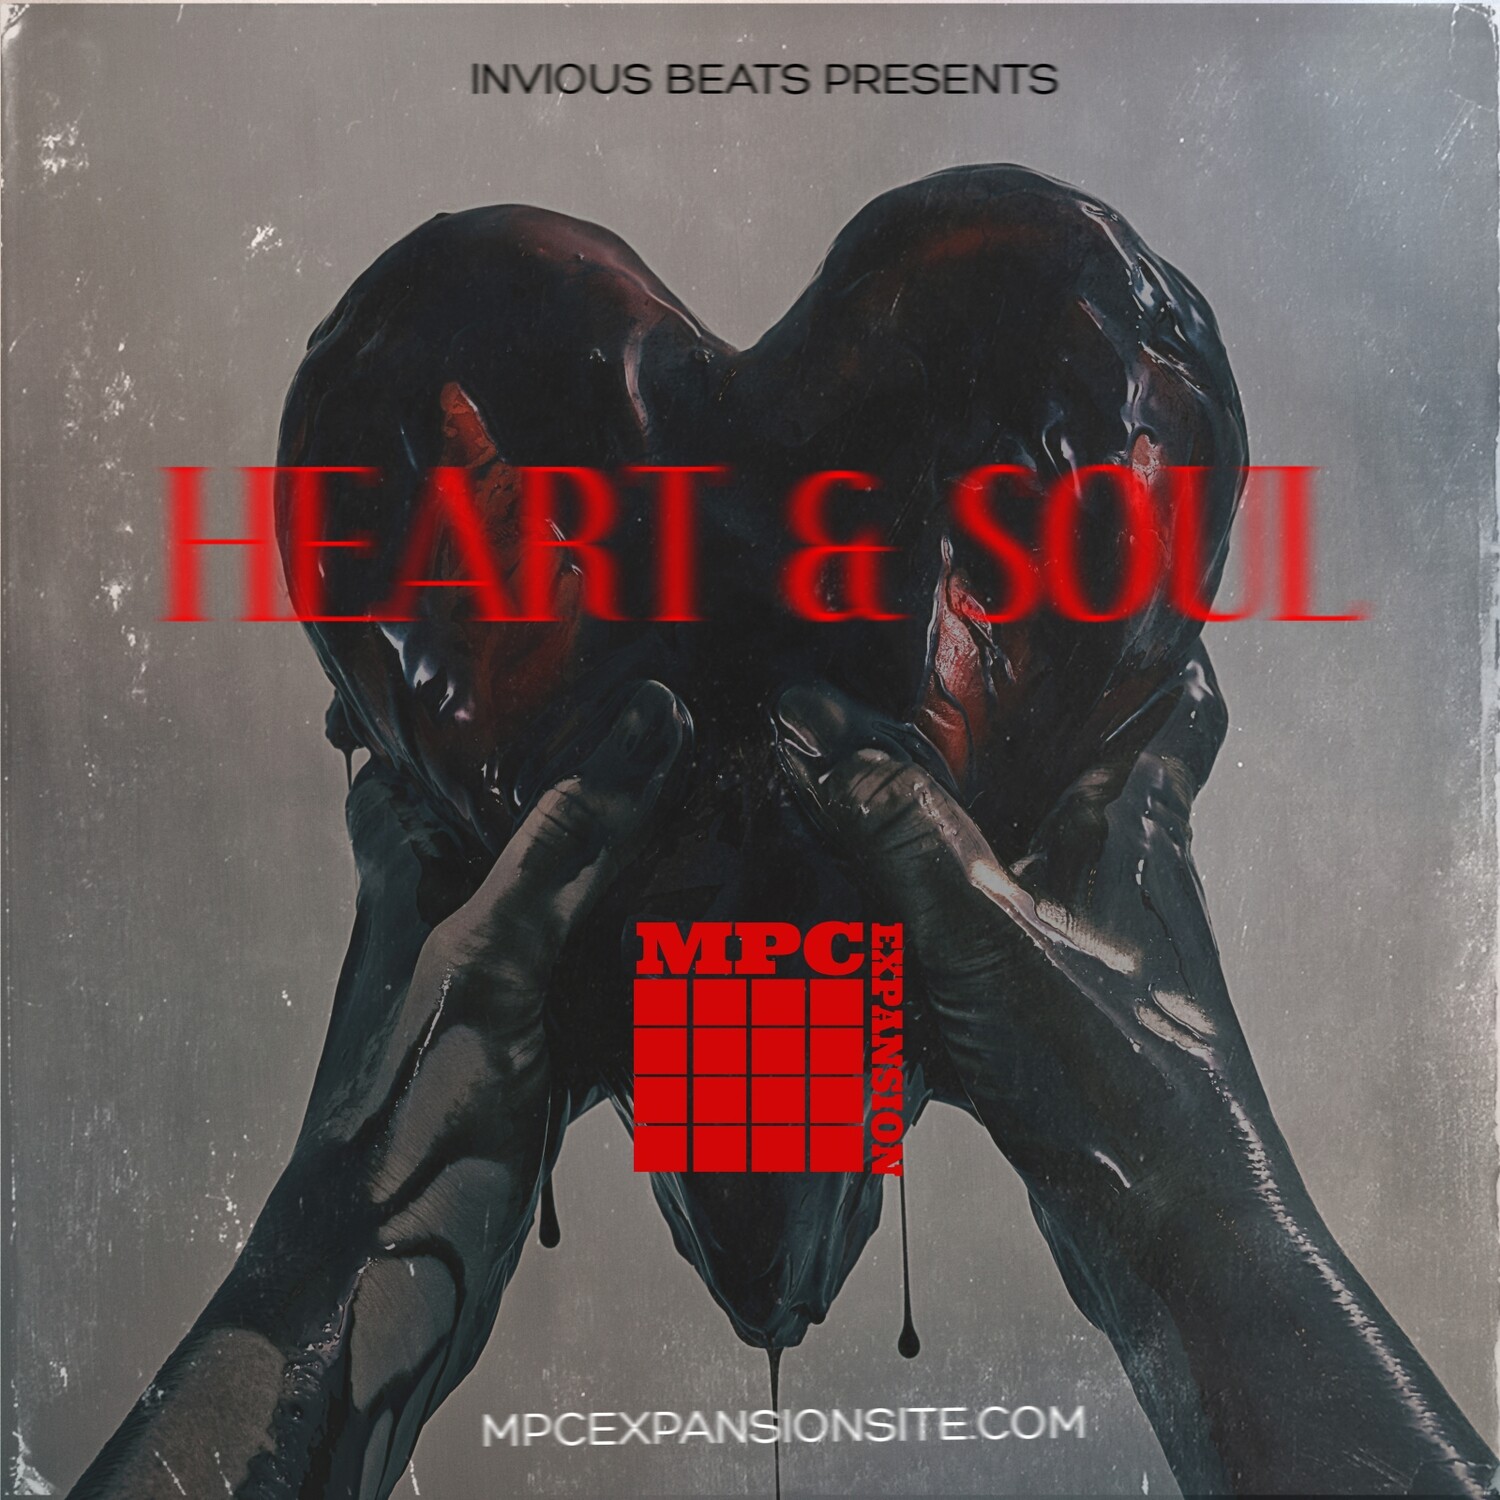 MPC EXPANSION "HEART & SOUL" by INVIOUS